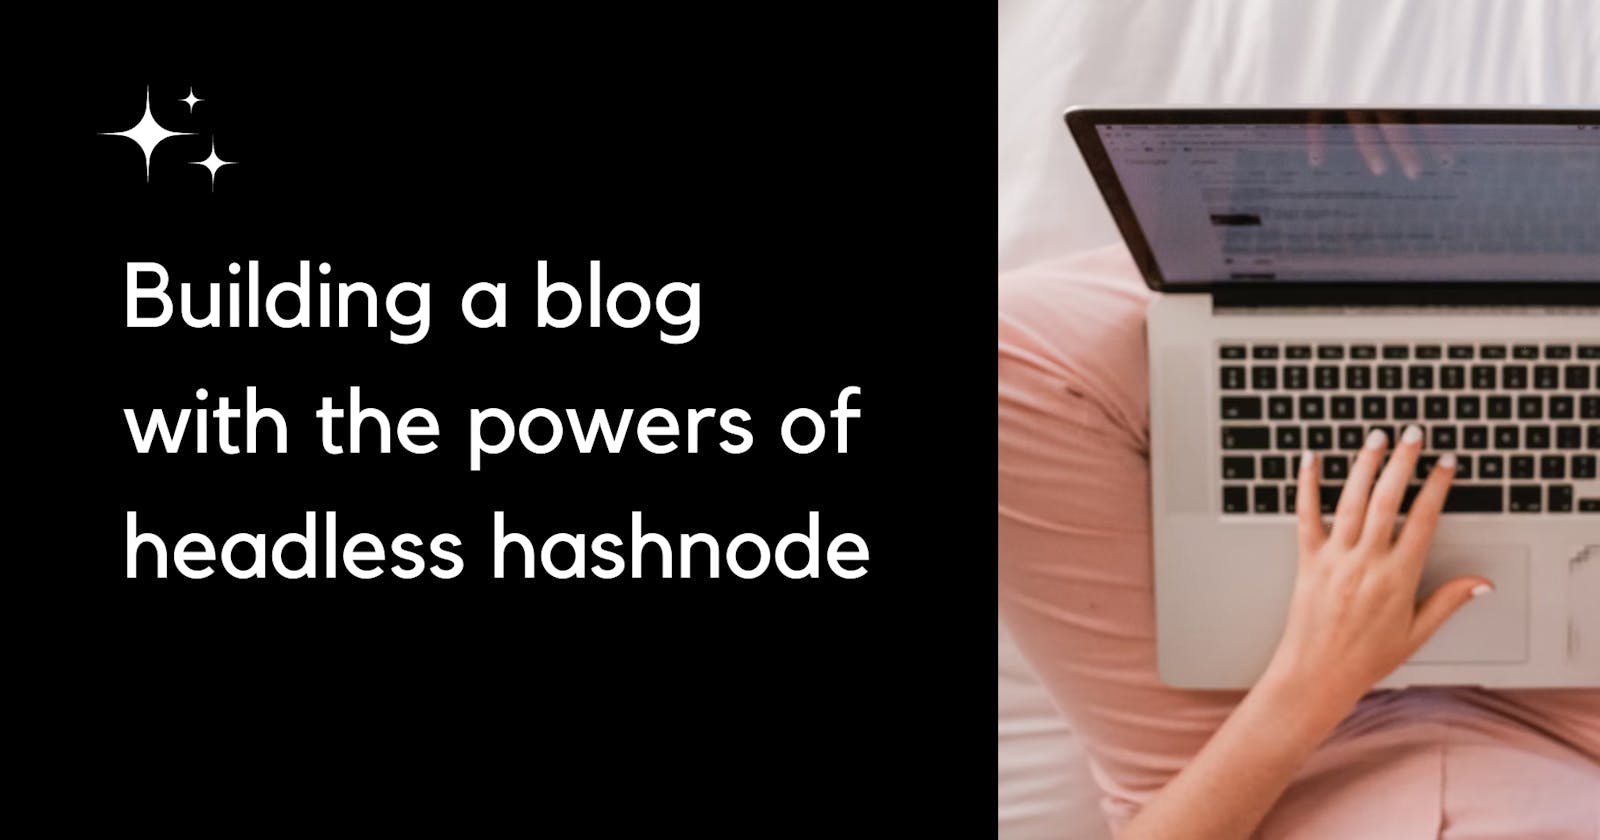 Building a blog with the powers of headless hashnode